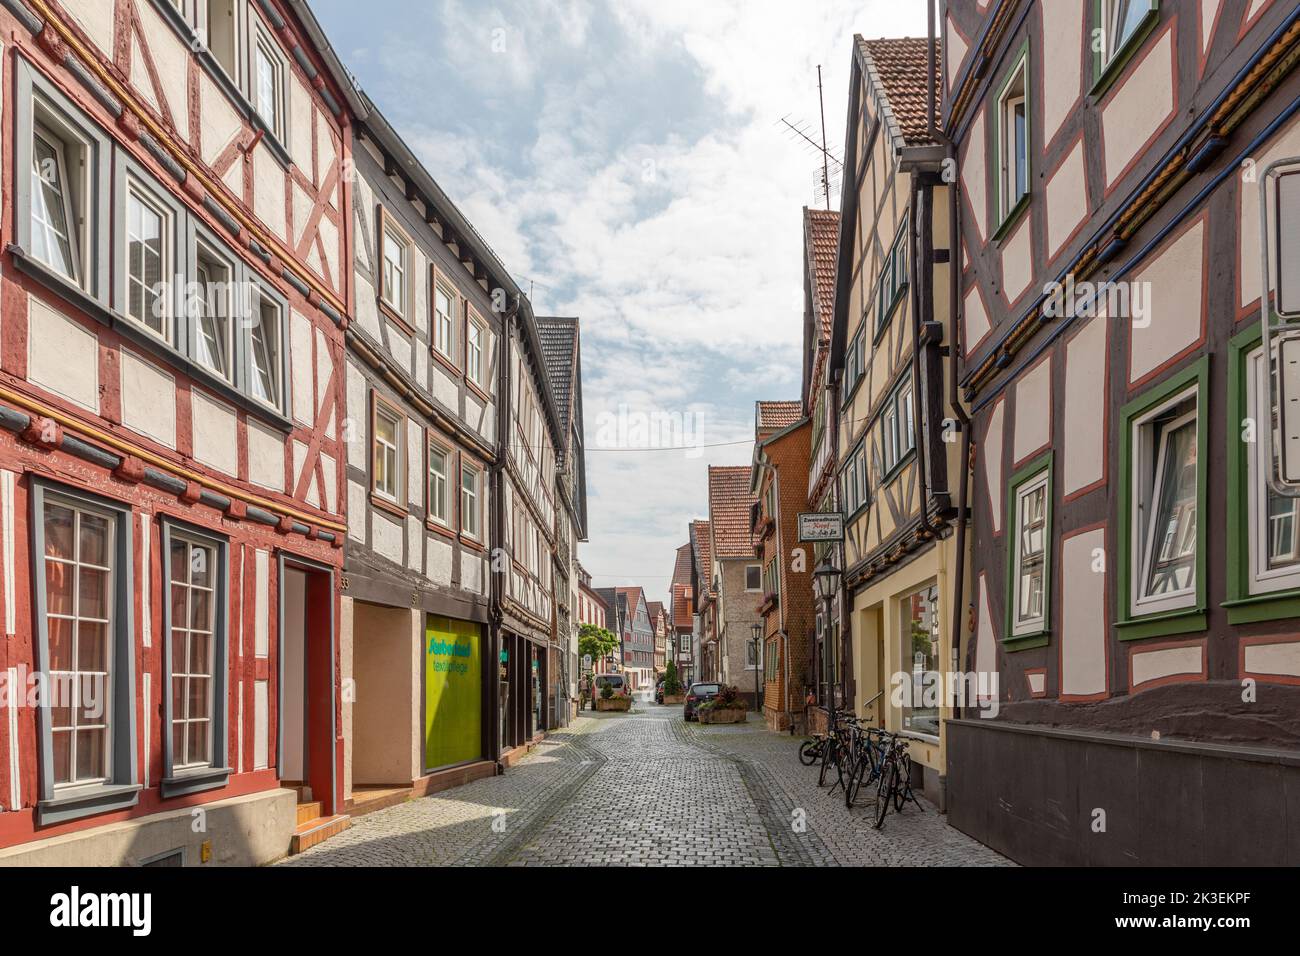 Alsfeld, Germany - June 25, 2021: small historic road covered with cobble stones and half timbered historic houses in Alsfeld, Germany. Stock Photo